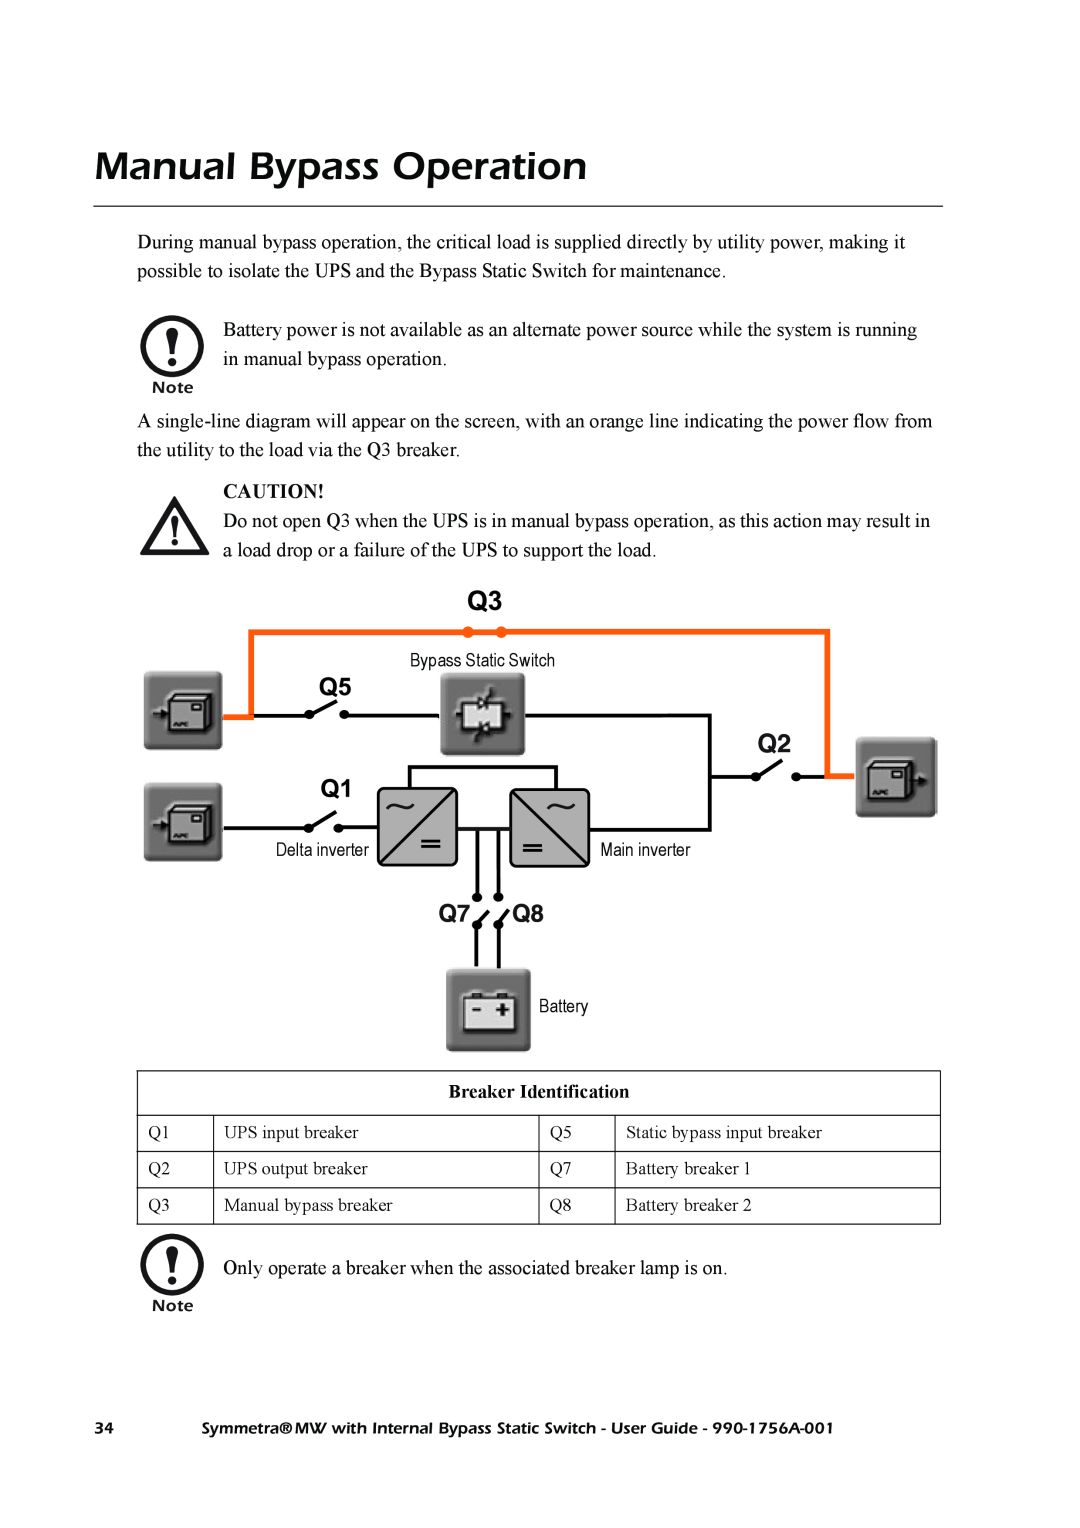 American Power Conversion Bypass Static manual Manual Bypass Operation 